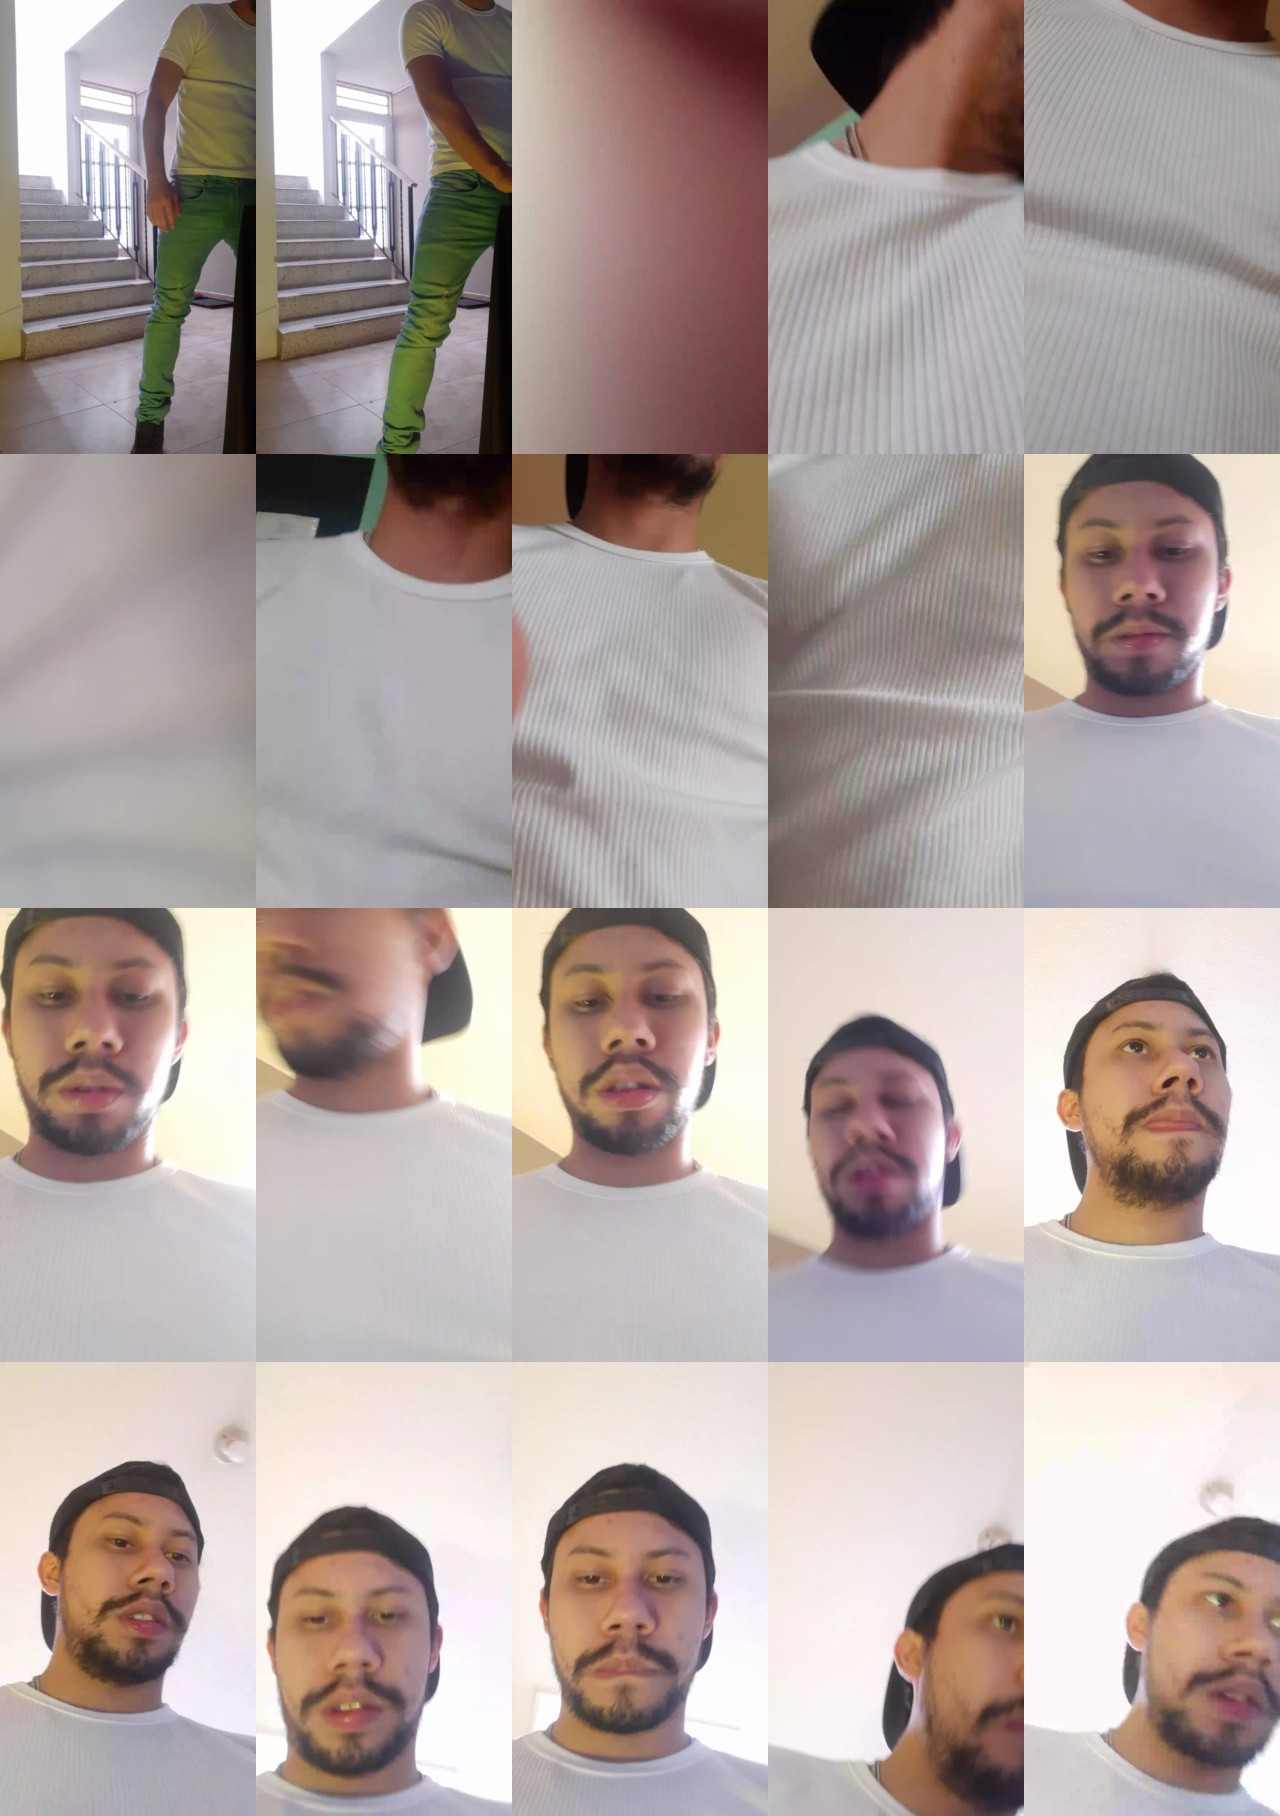 A_david  26-11-2020 Recorded Video Download